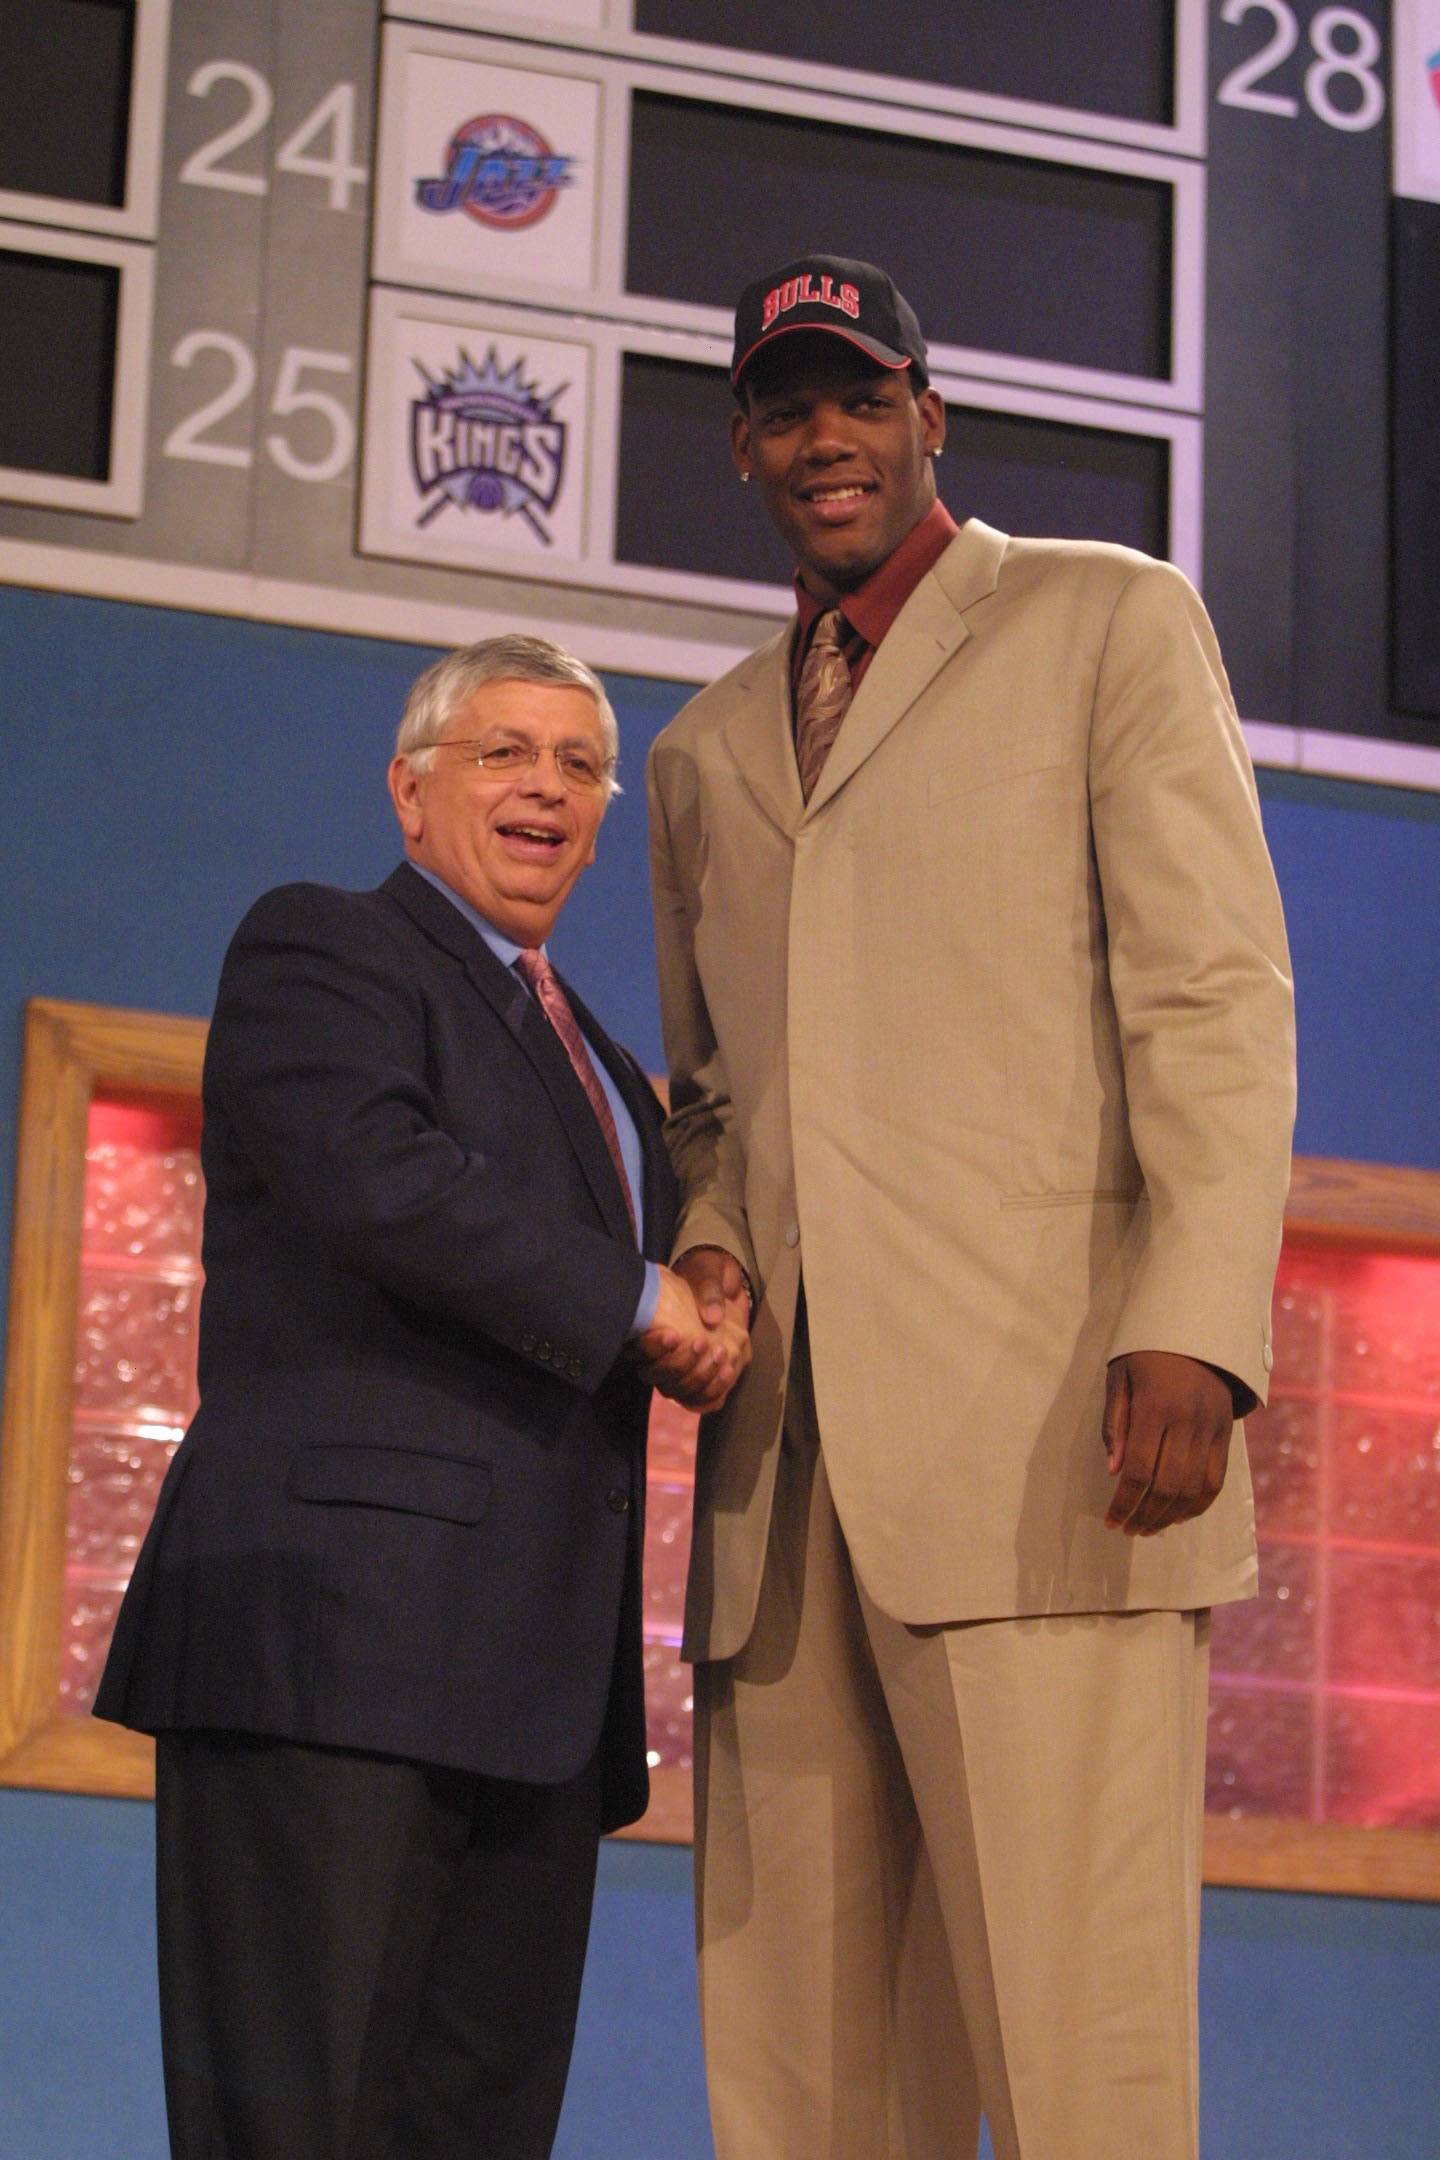 Kwame Brown - For - Image 4 from The 10 Biggest NBA Draft Day Fails